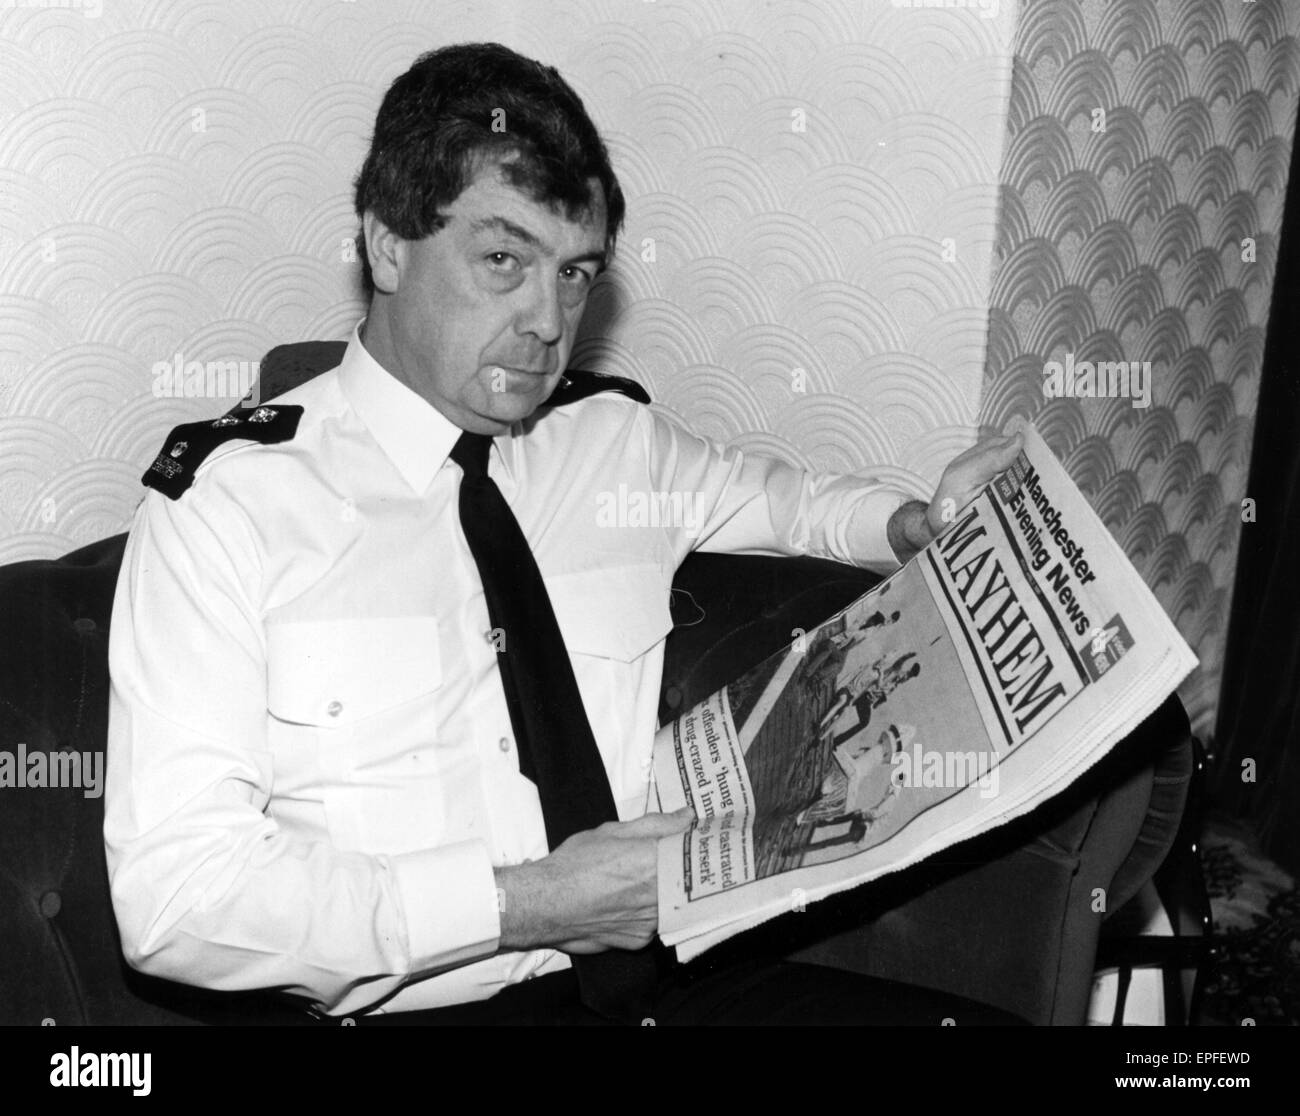 Strangeways Prison Riot April 1990. Prison Officer Peter H with copy of MEN Newspaper.  A 25-day prison riot and rooftop protest at Strangeways Prison in Manchester, England. The riot began on the 1st April 1990 when prisoners took control of the prison c Stock Photo